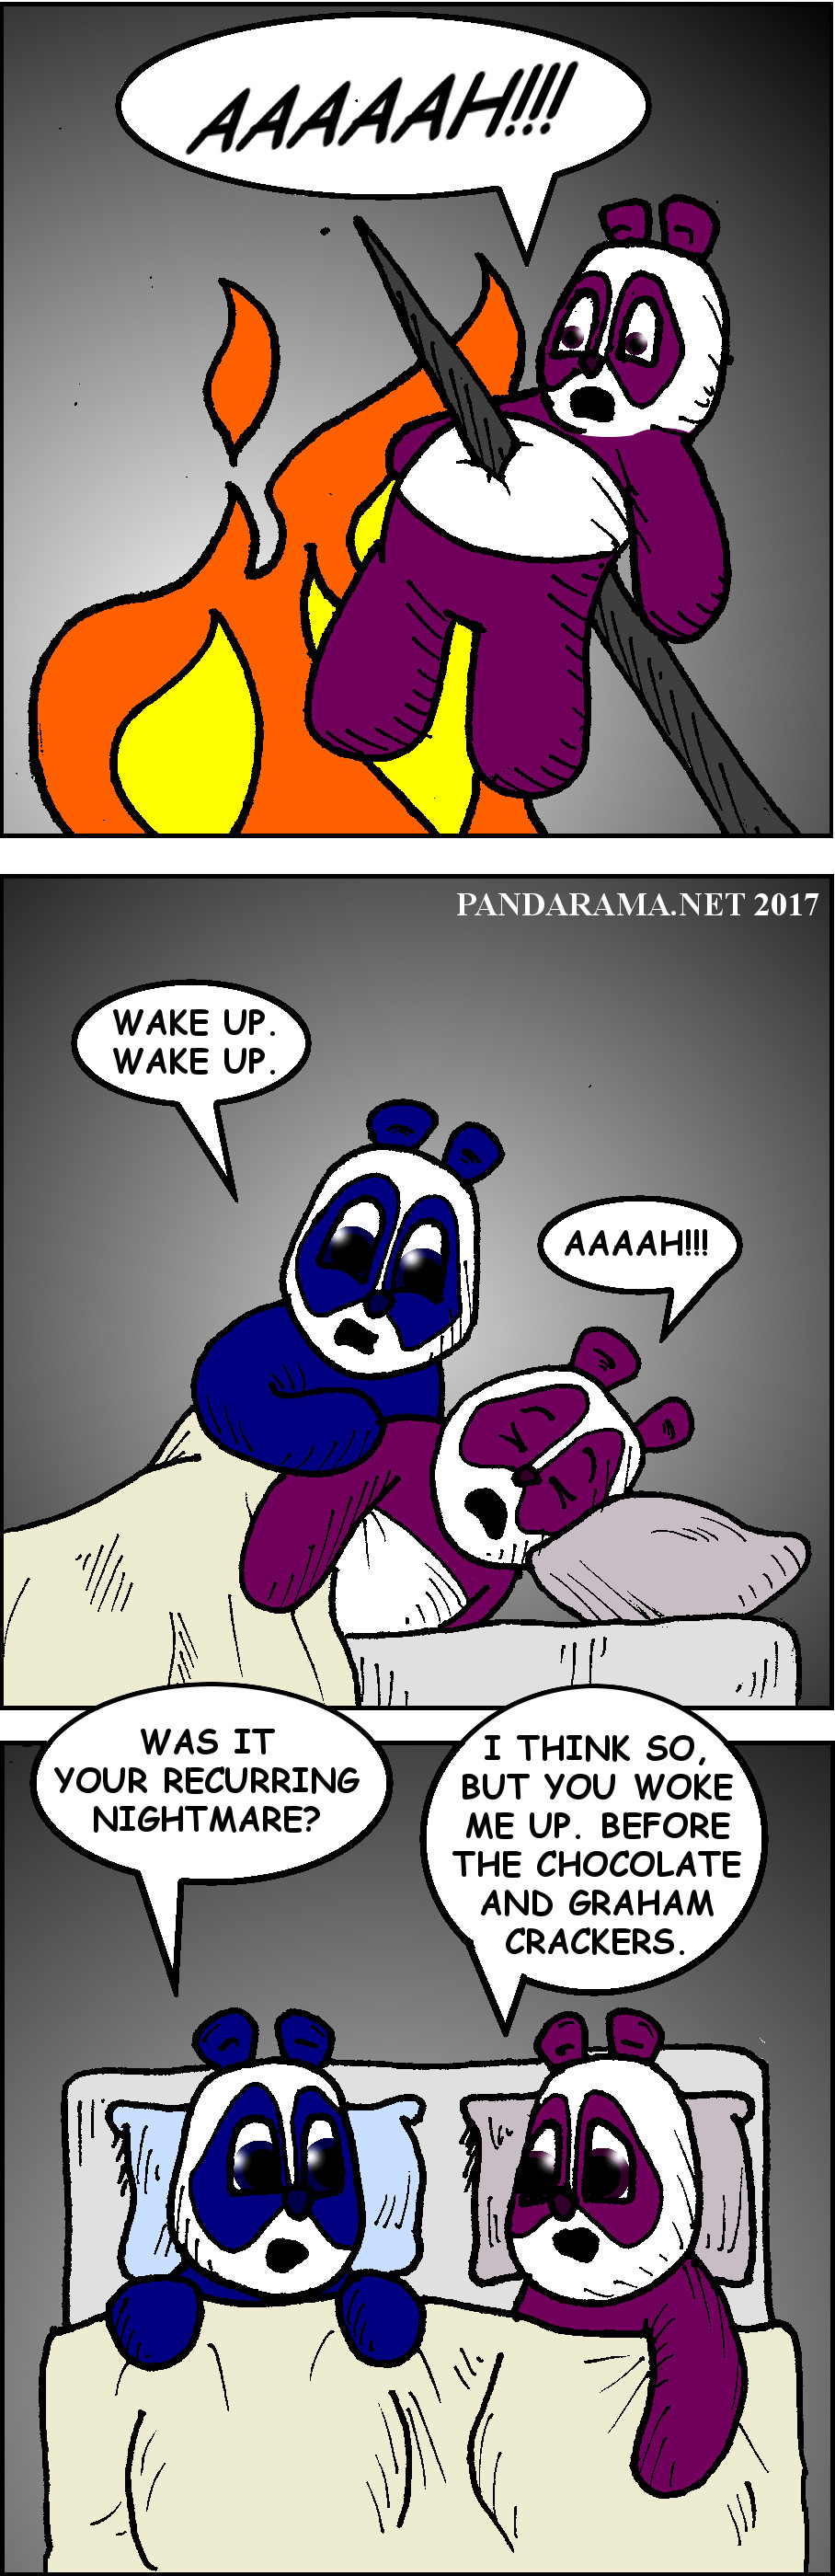 pandarama cartoon of recurring nightmare of being a marshmallow in a smore.